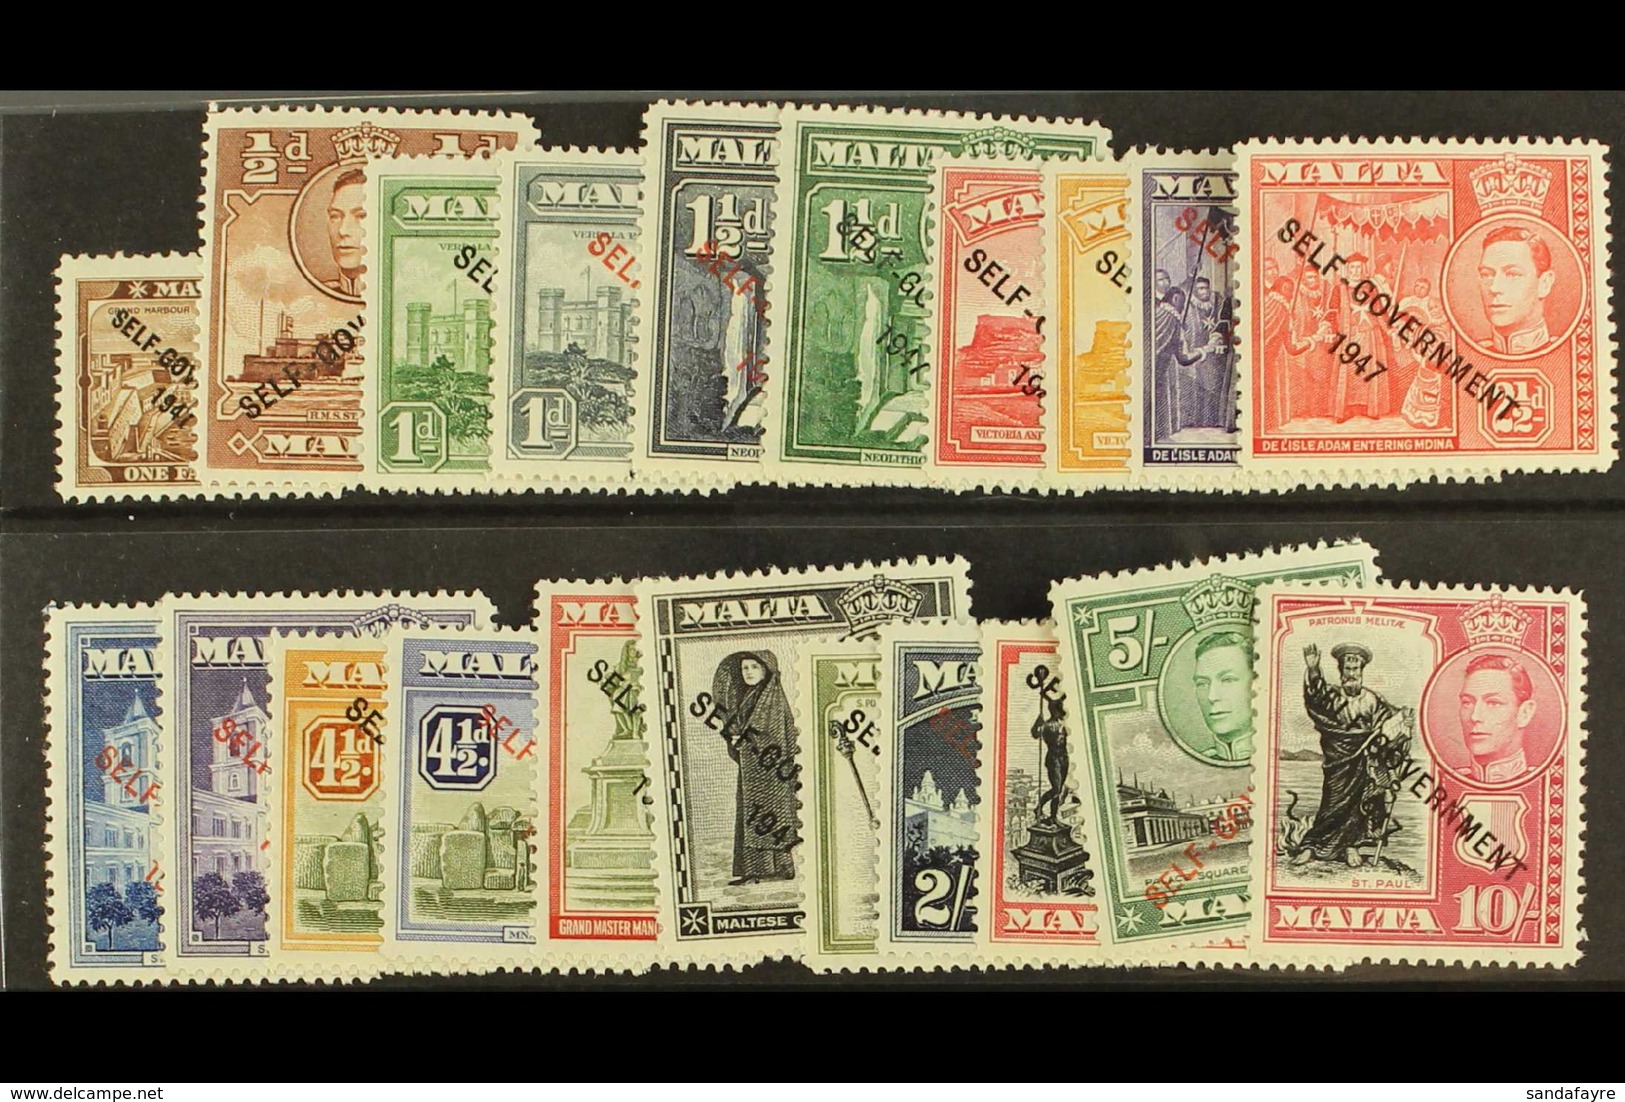 1948-53 Complete Self Government Set, SG 234/248, Fine Never Hinged Mint. (21 Stamps) For More Images, Please Visit Http - Malta (...-1964)